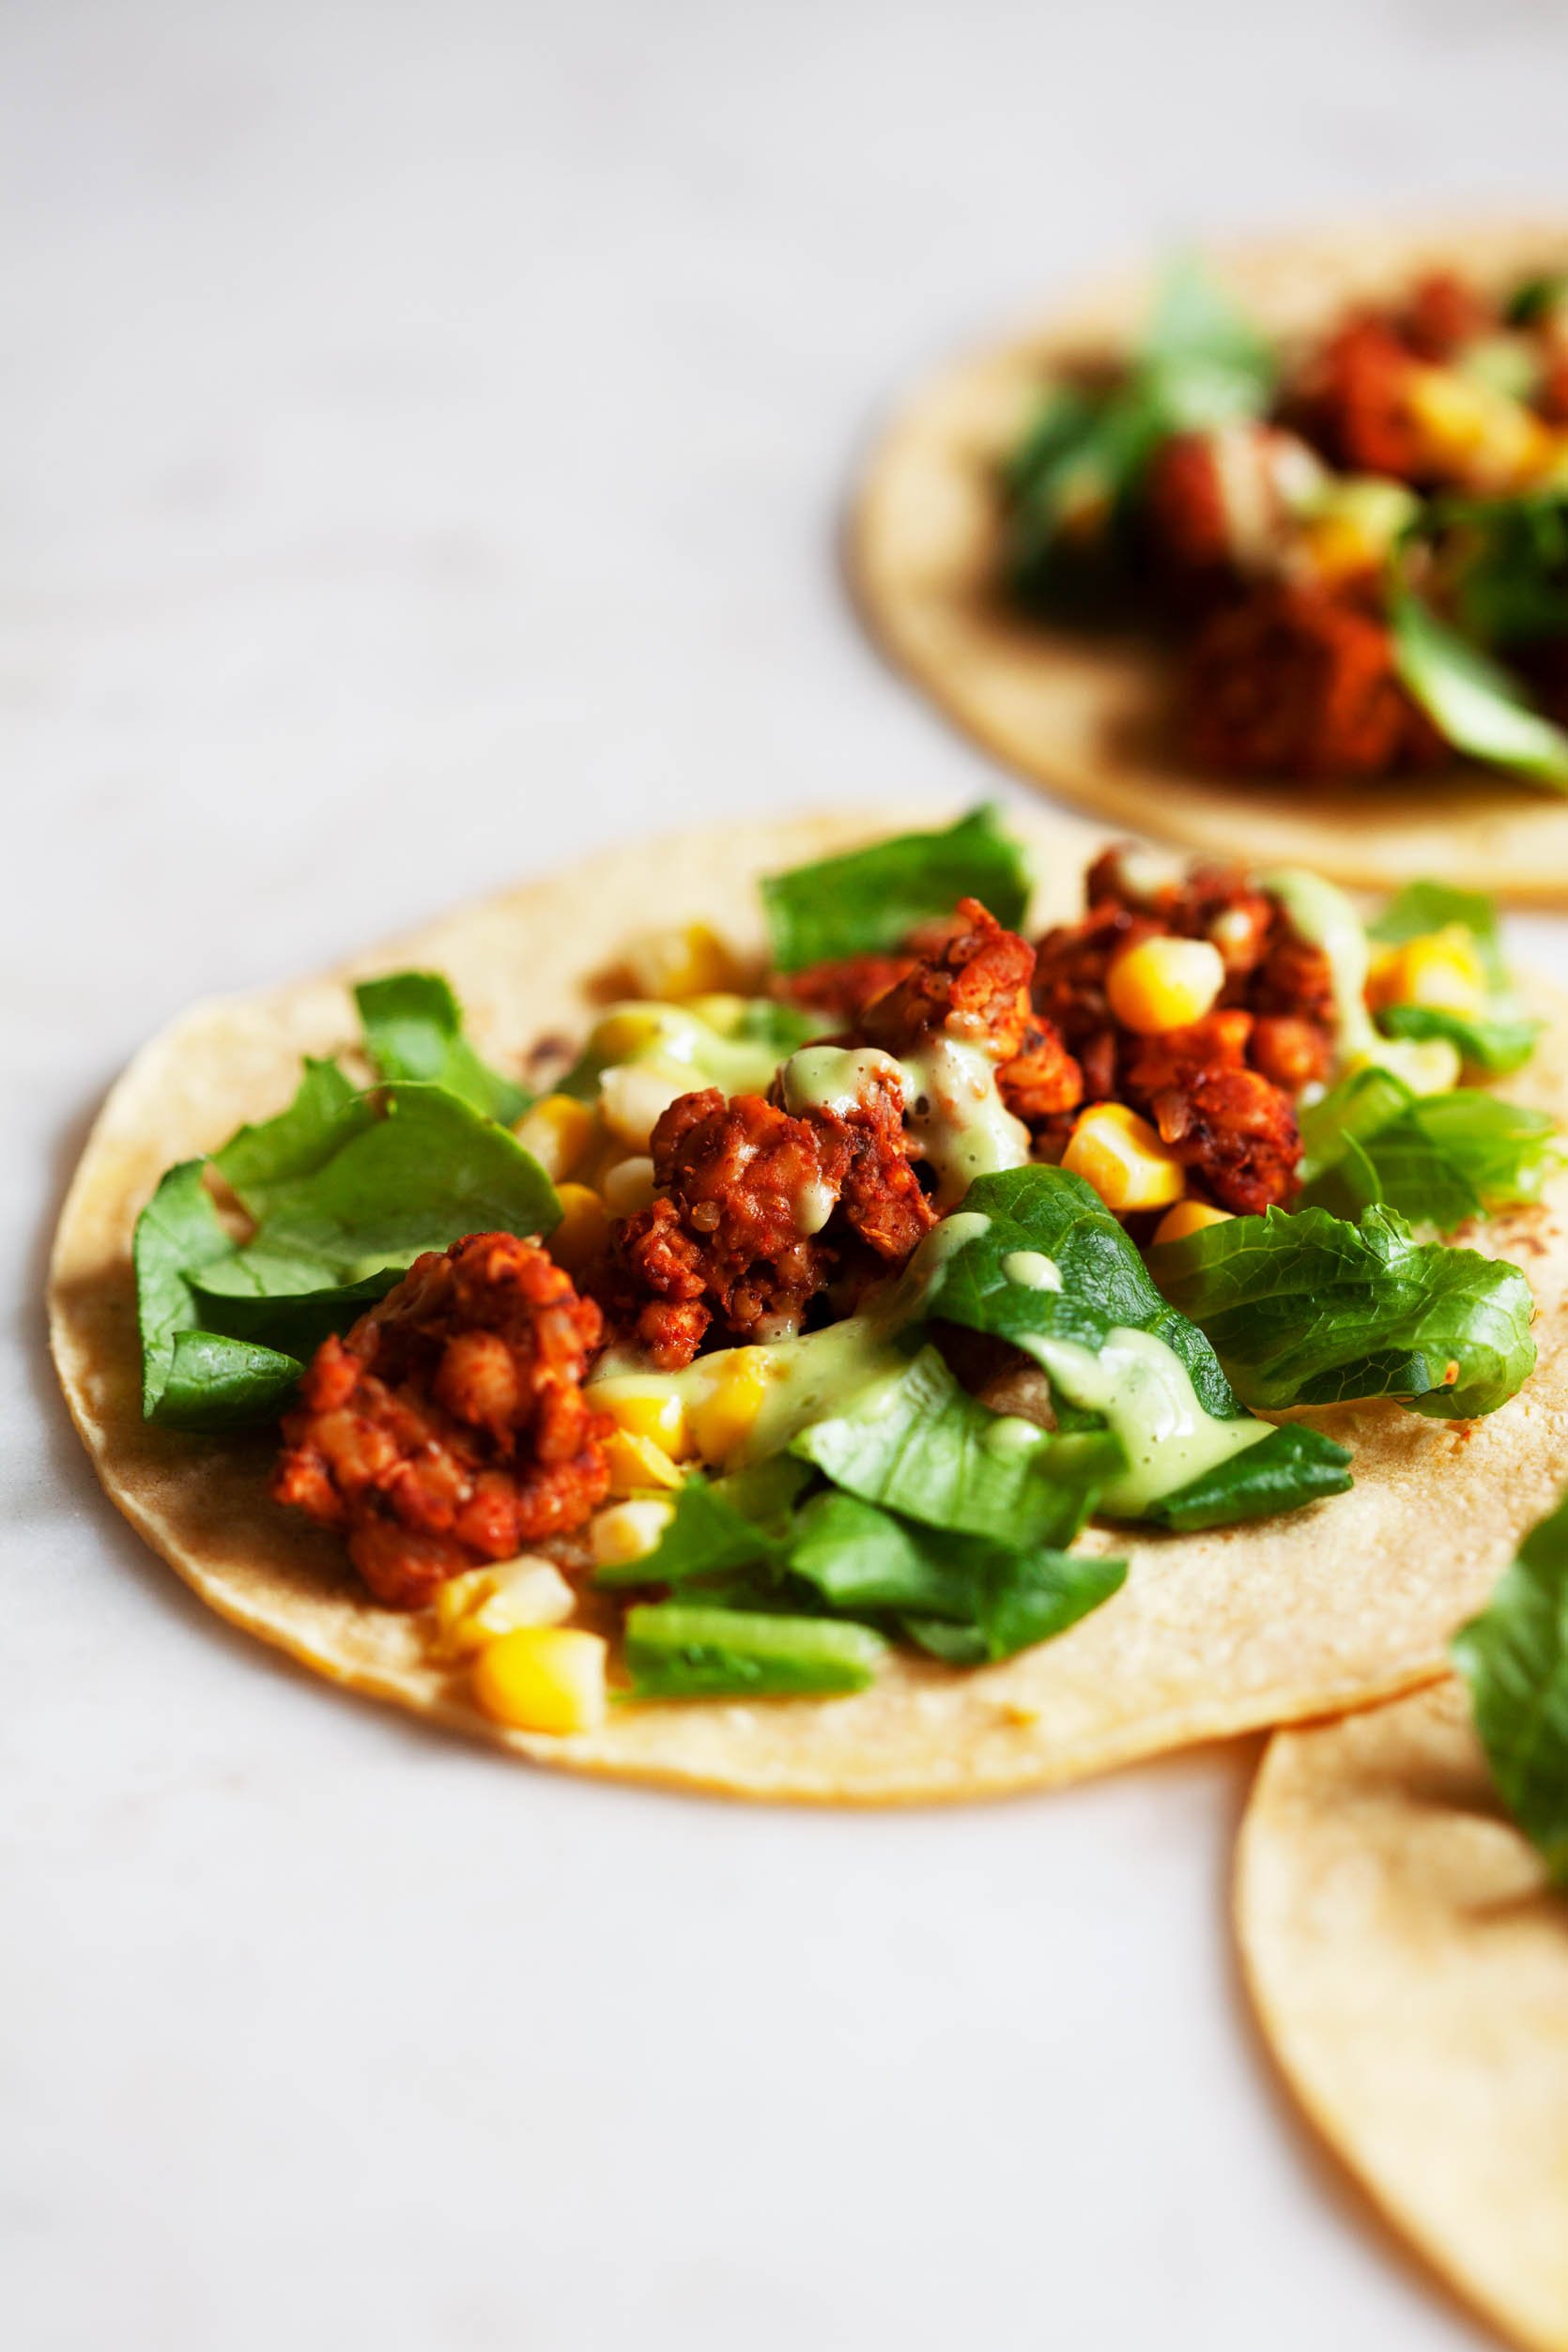 Vegan Chili Lime Tempeh Tacos | The Full Helping